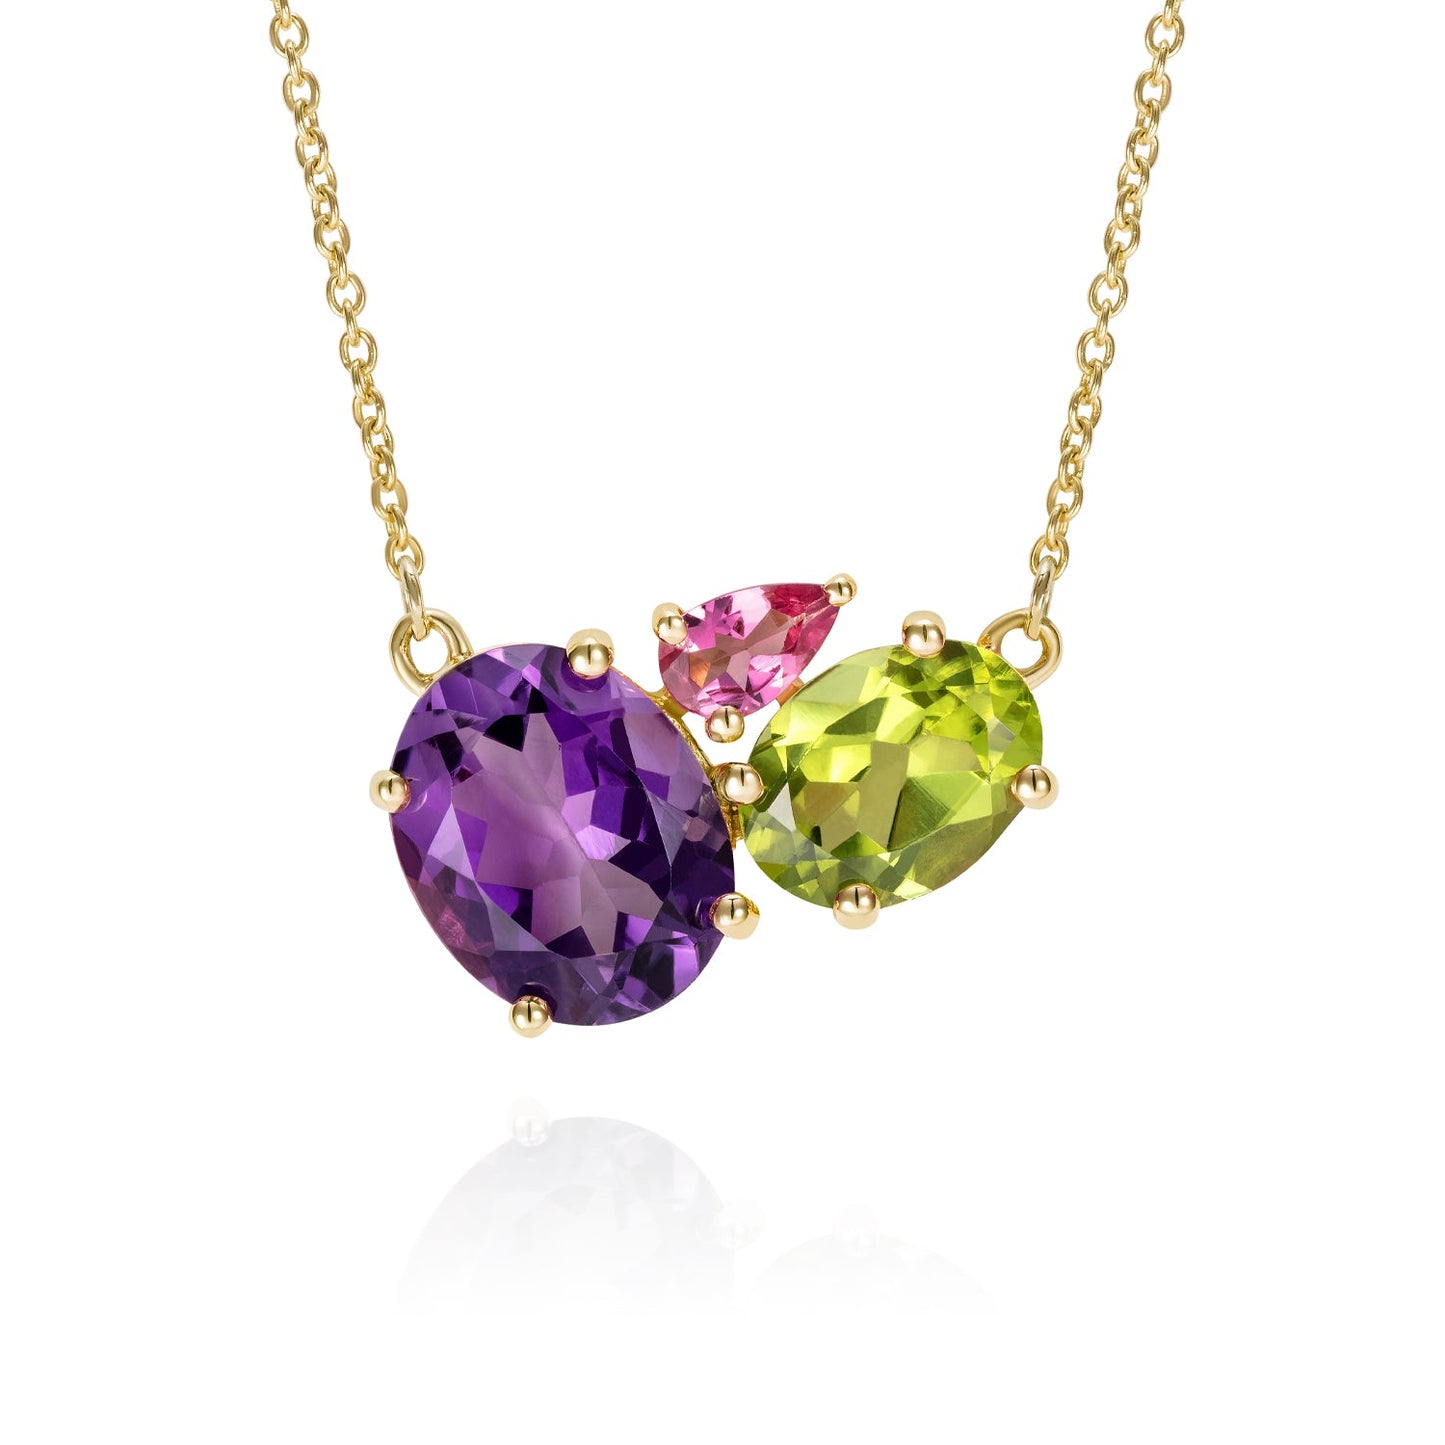 Load image into Gallery viewer, British Jewellers designed London-made custom gold jewellery - Purple Amethyst Gold Cluster Necklace with Peridot and Pink Tourmaline – Como Collection, Augustine Jewellery, British Jewellers, Gemstone Jewellery, Luxury Jewellery London.
